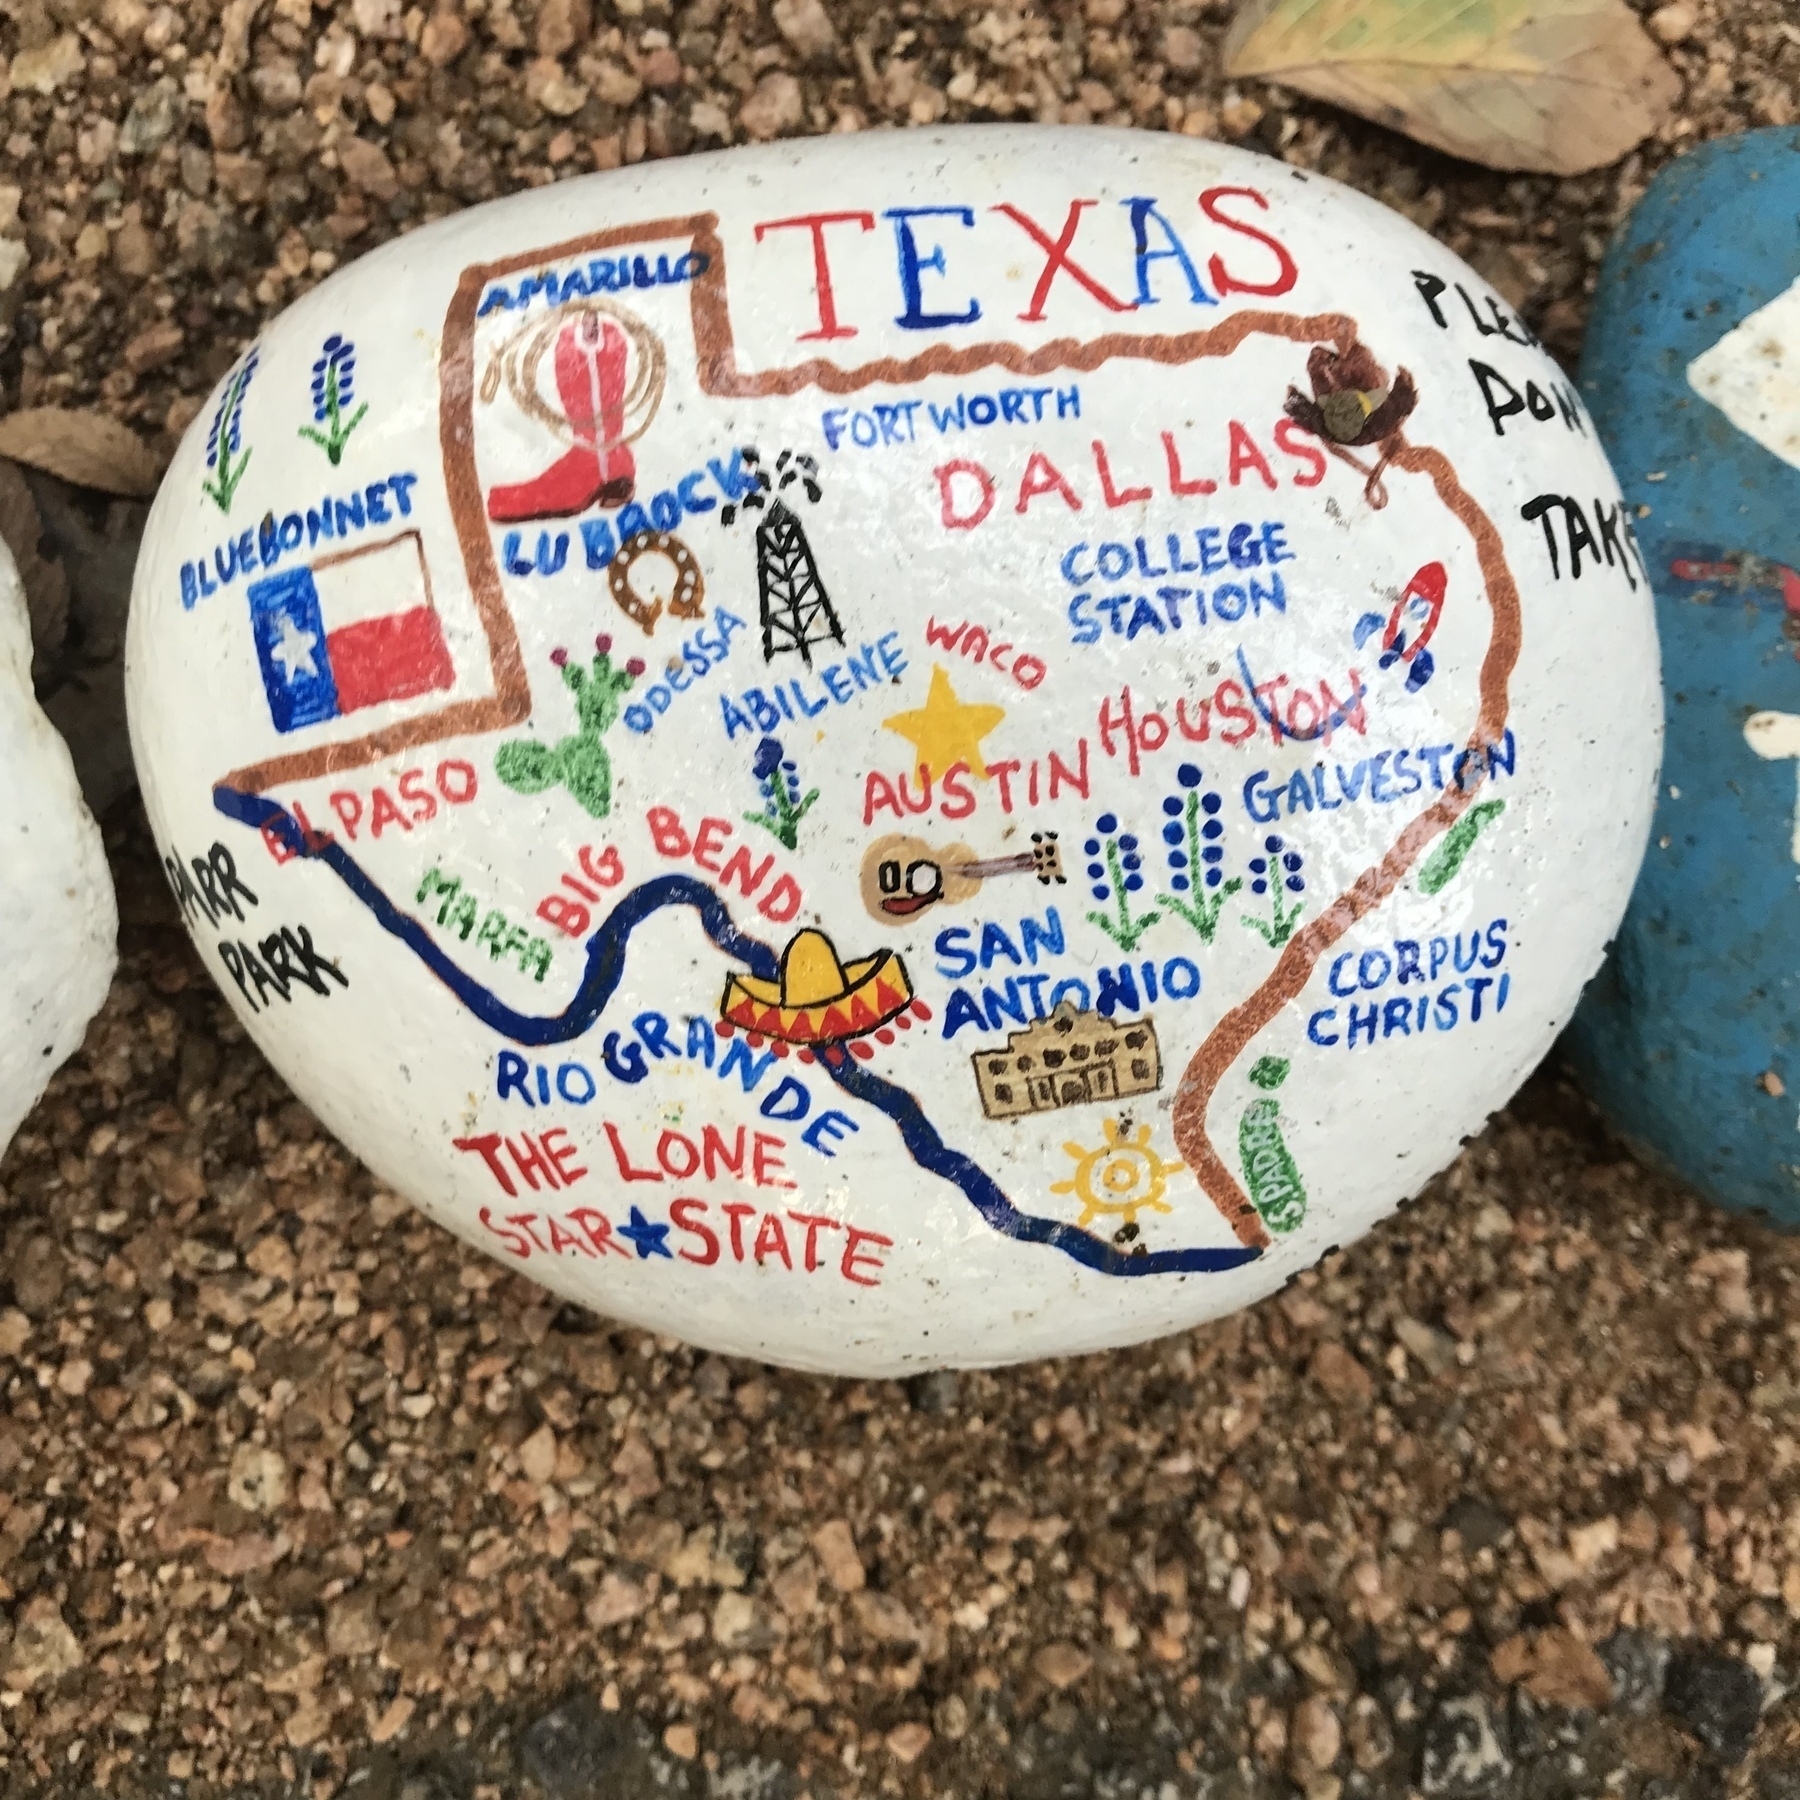 A rock at the Parr Park Rock Art Trail with major Texas cities and regions